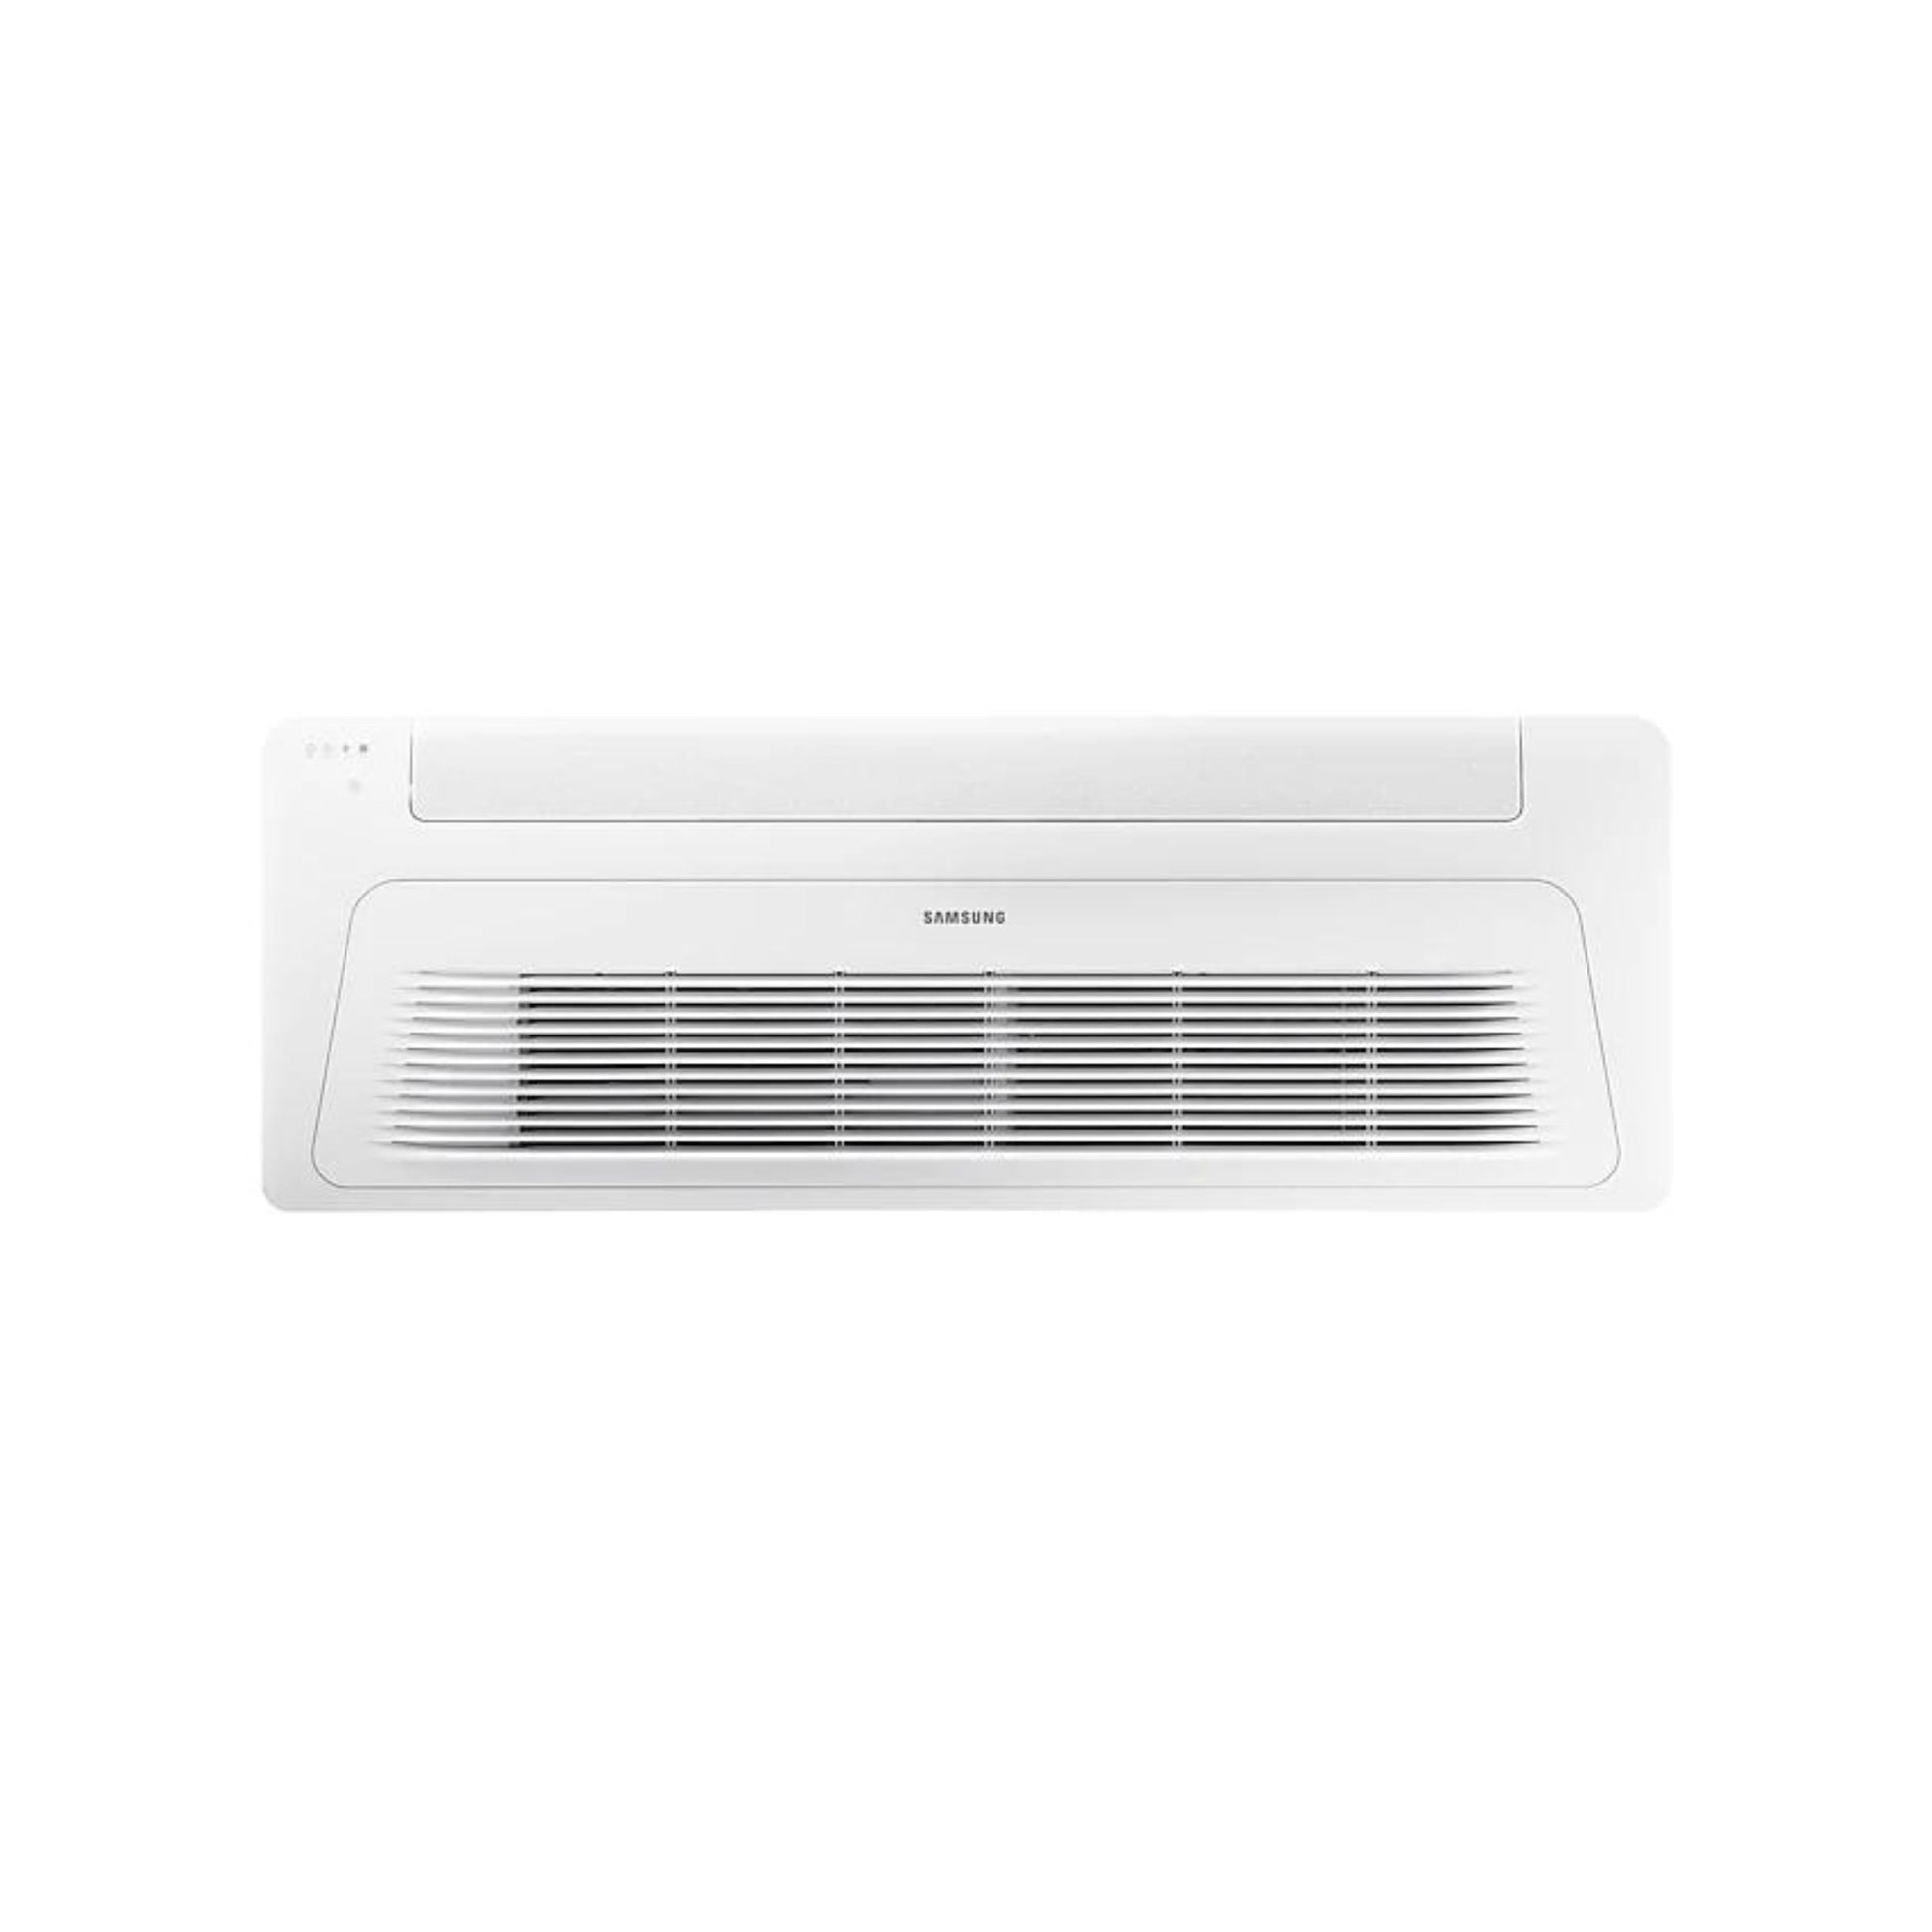 Samsung CAC WindFree 1 Way Cooling Only Air Conditioner Panel View